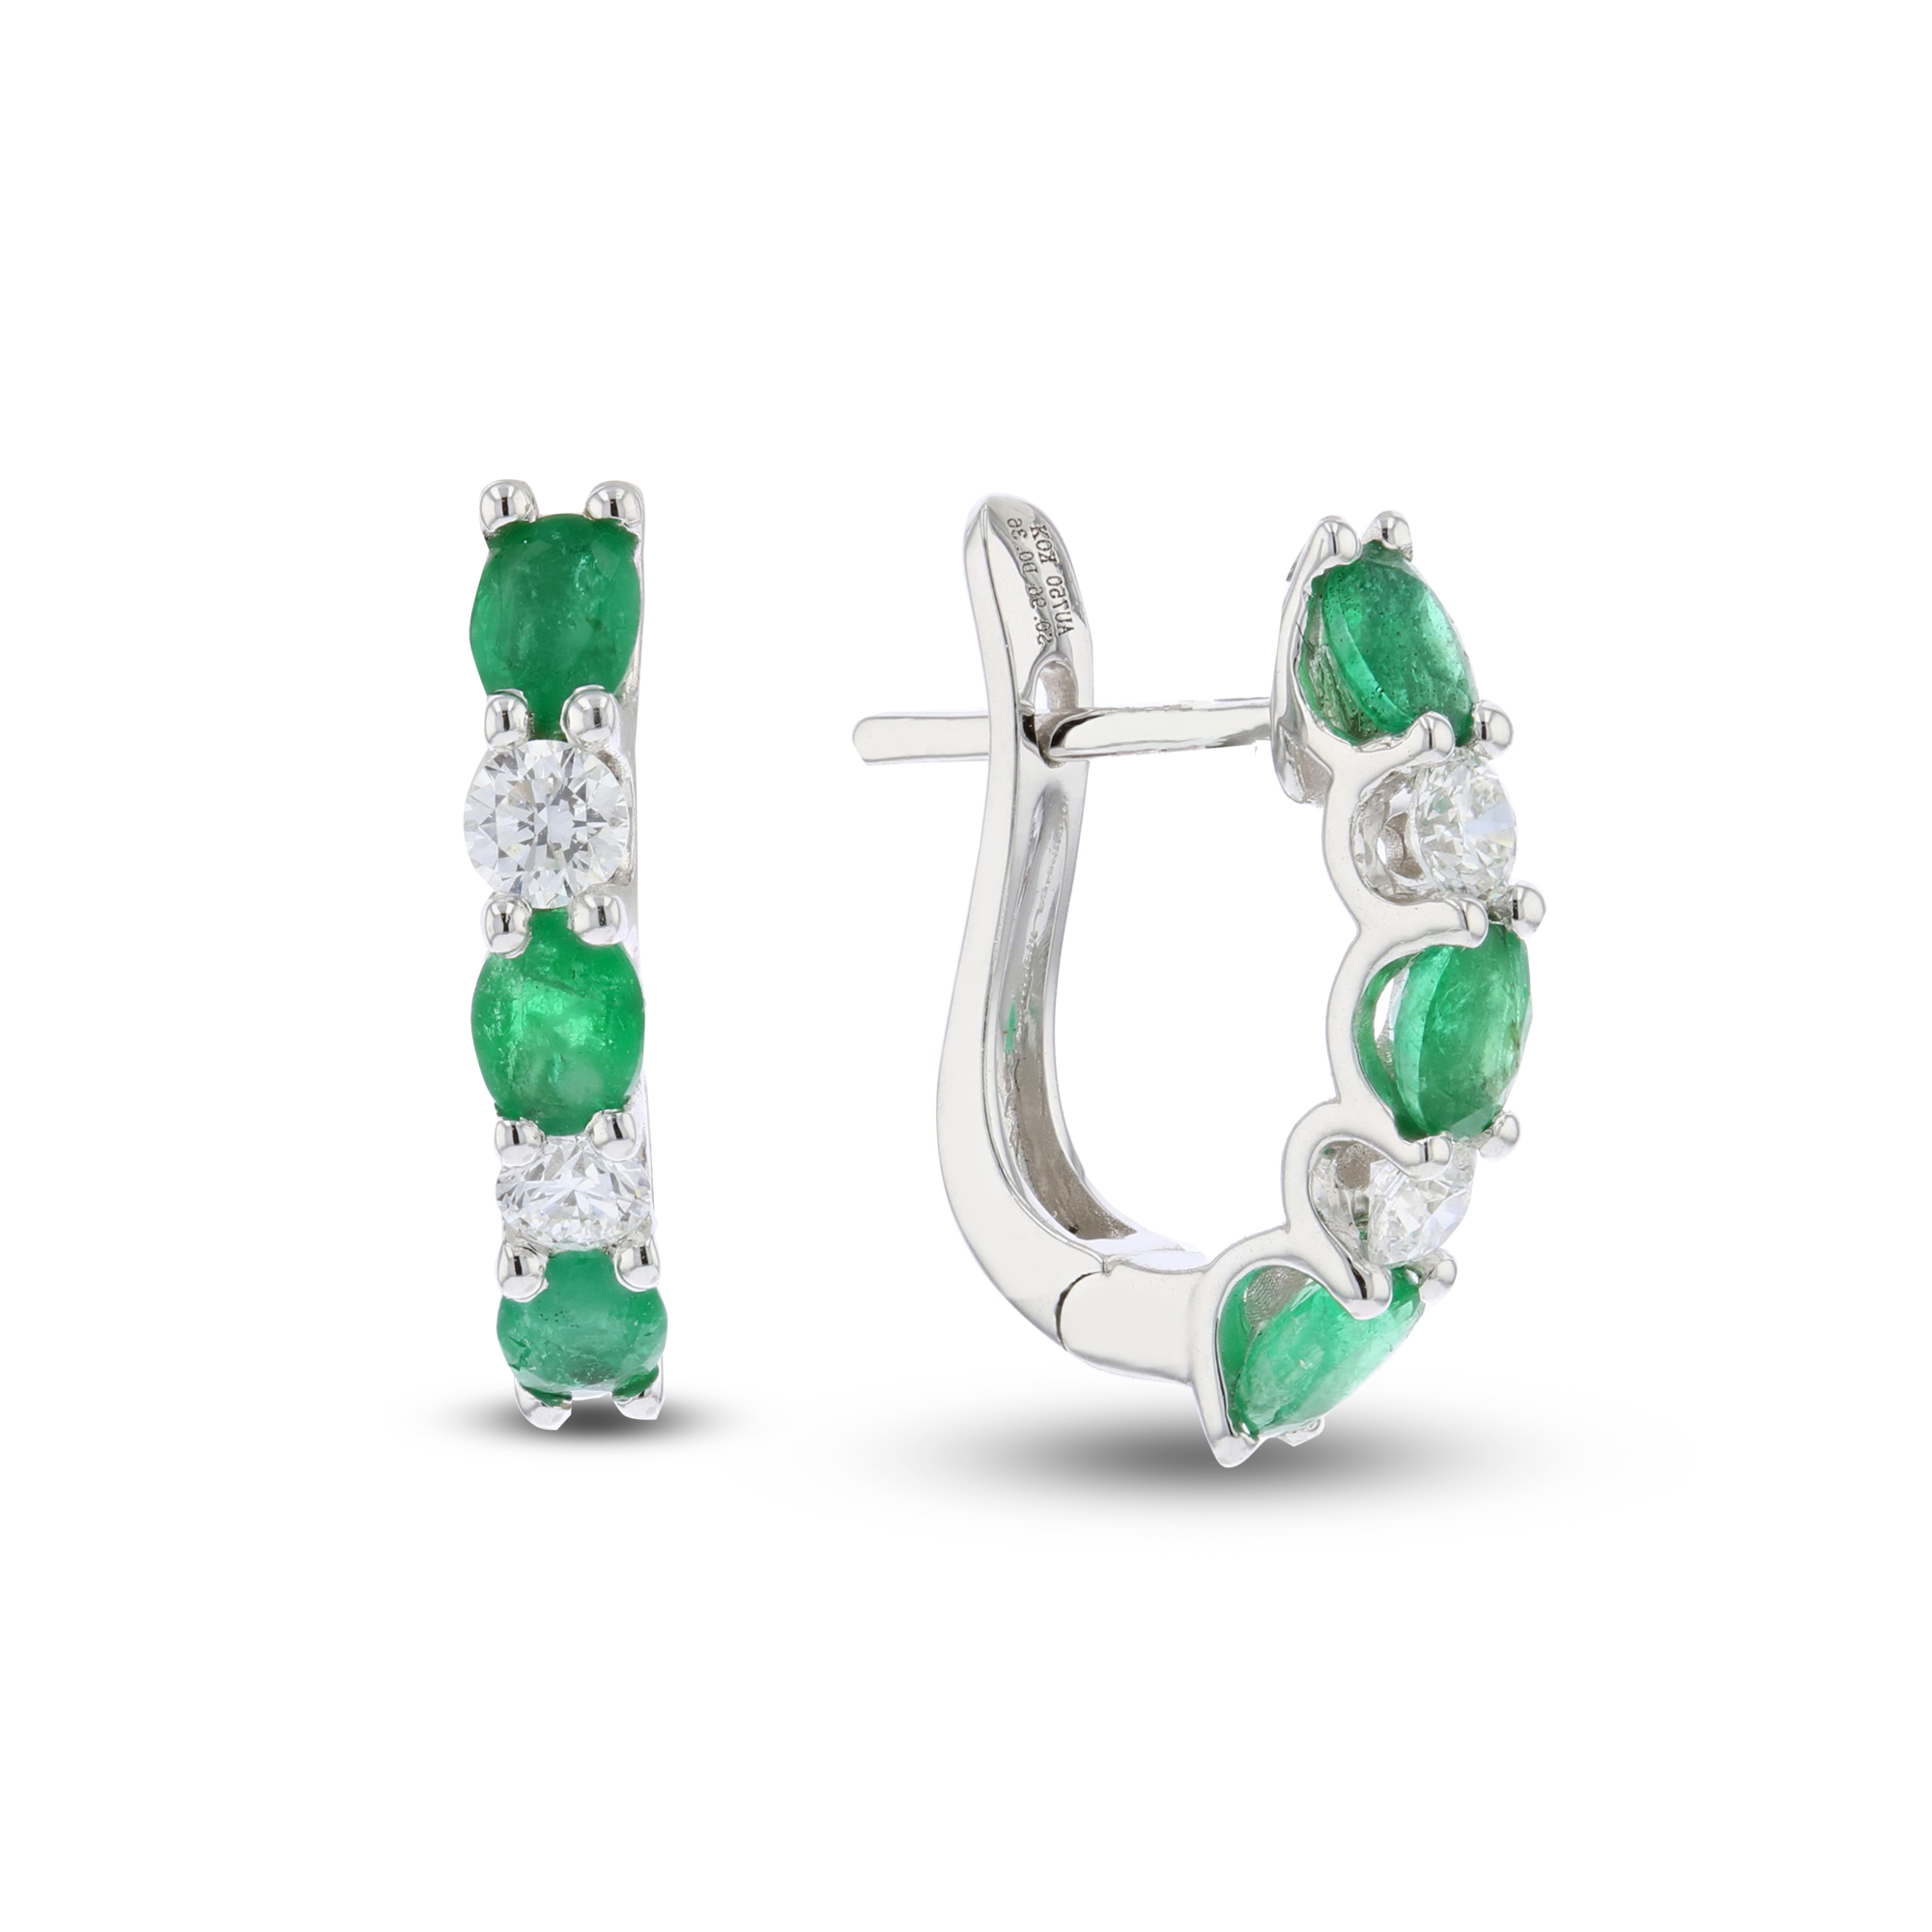 View 1.30ctw Diamond and Emerald Hoop Earrings in 18k White Gold